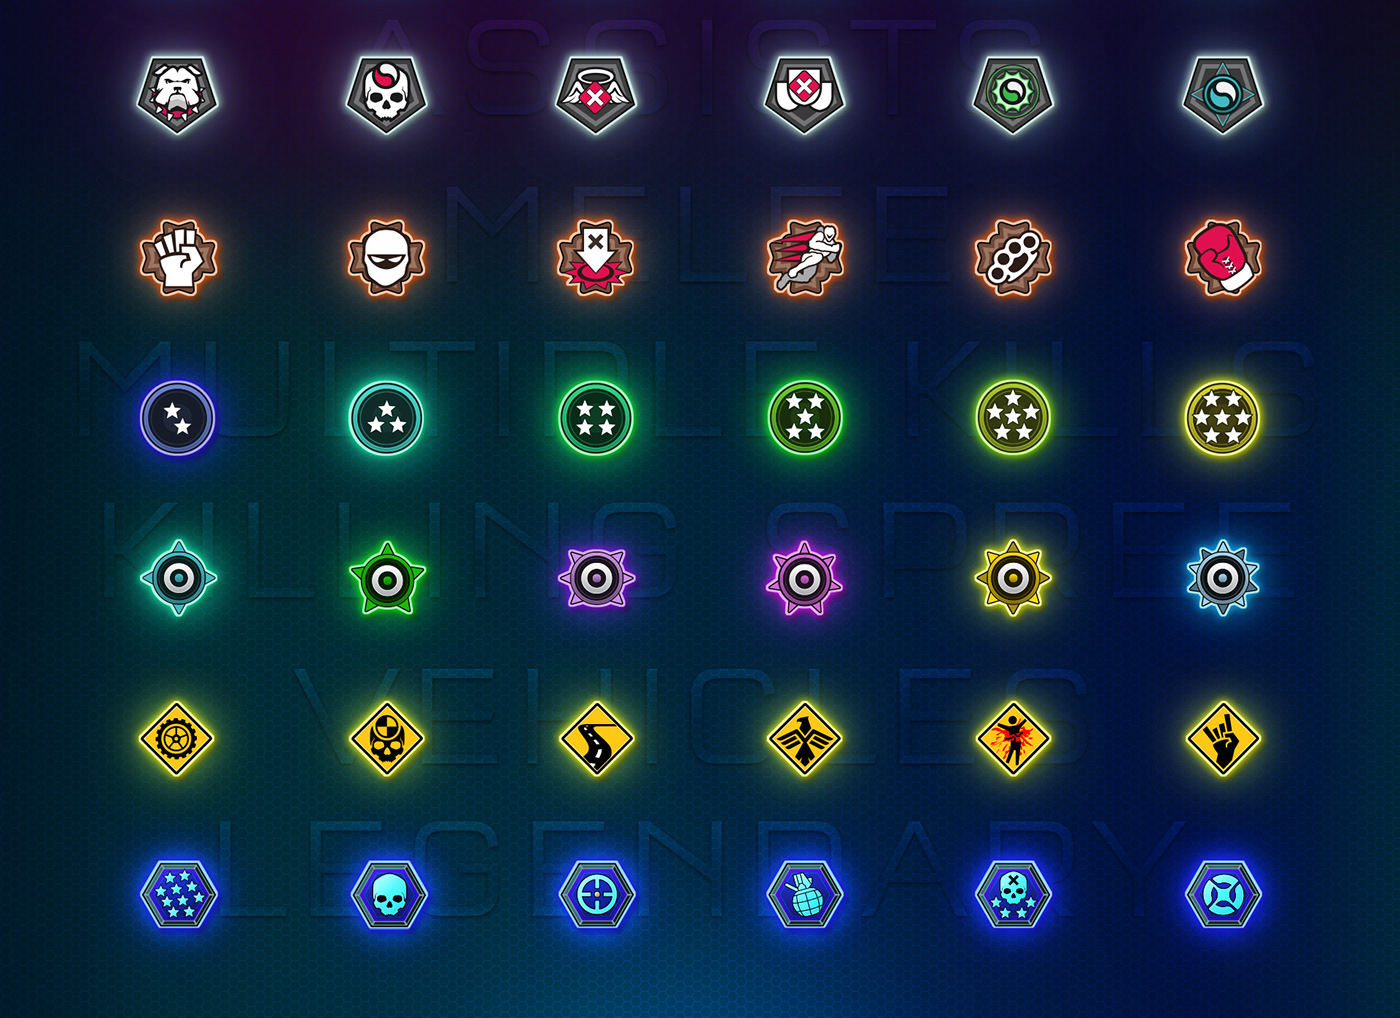 Halo master chief xbox medals icons weapons vehicles difficulty game UI